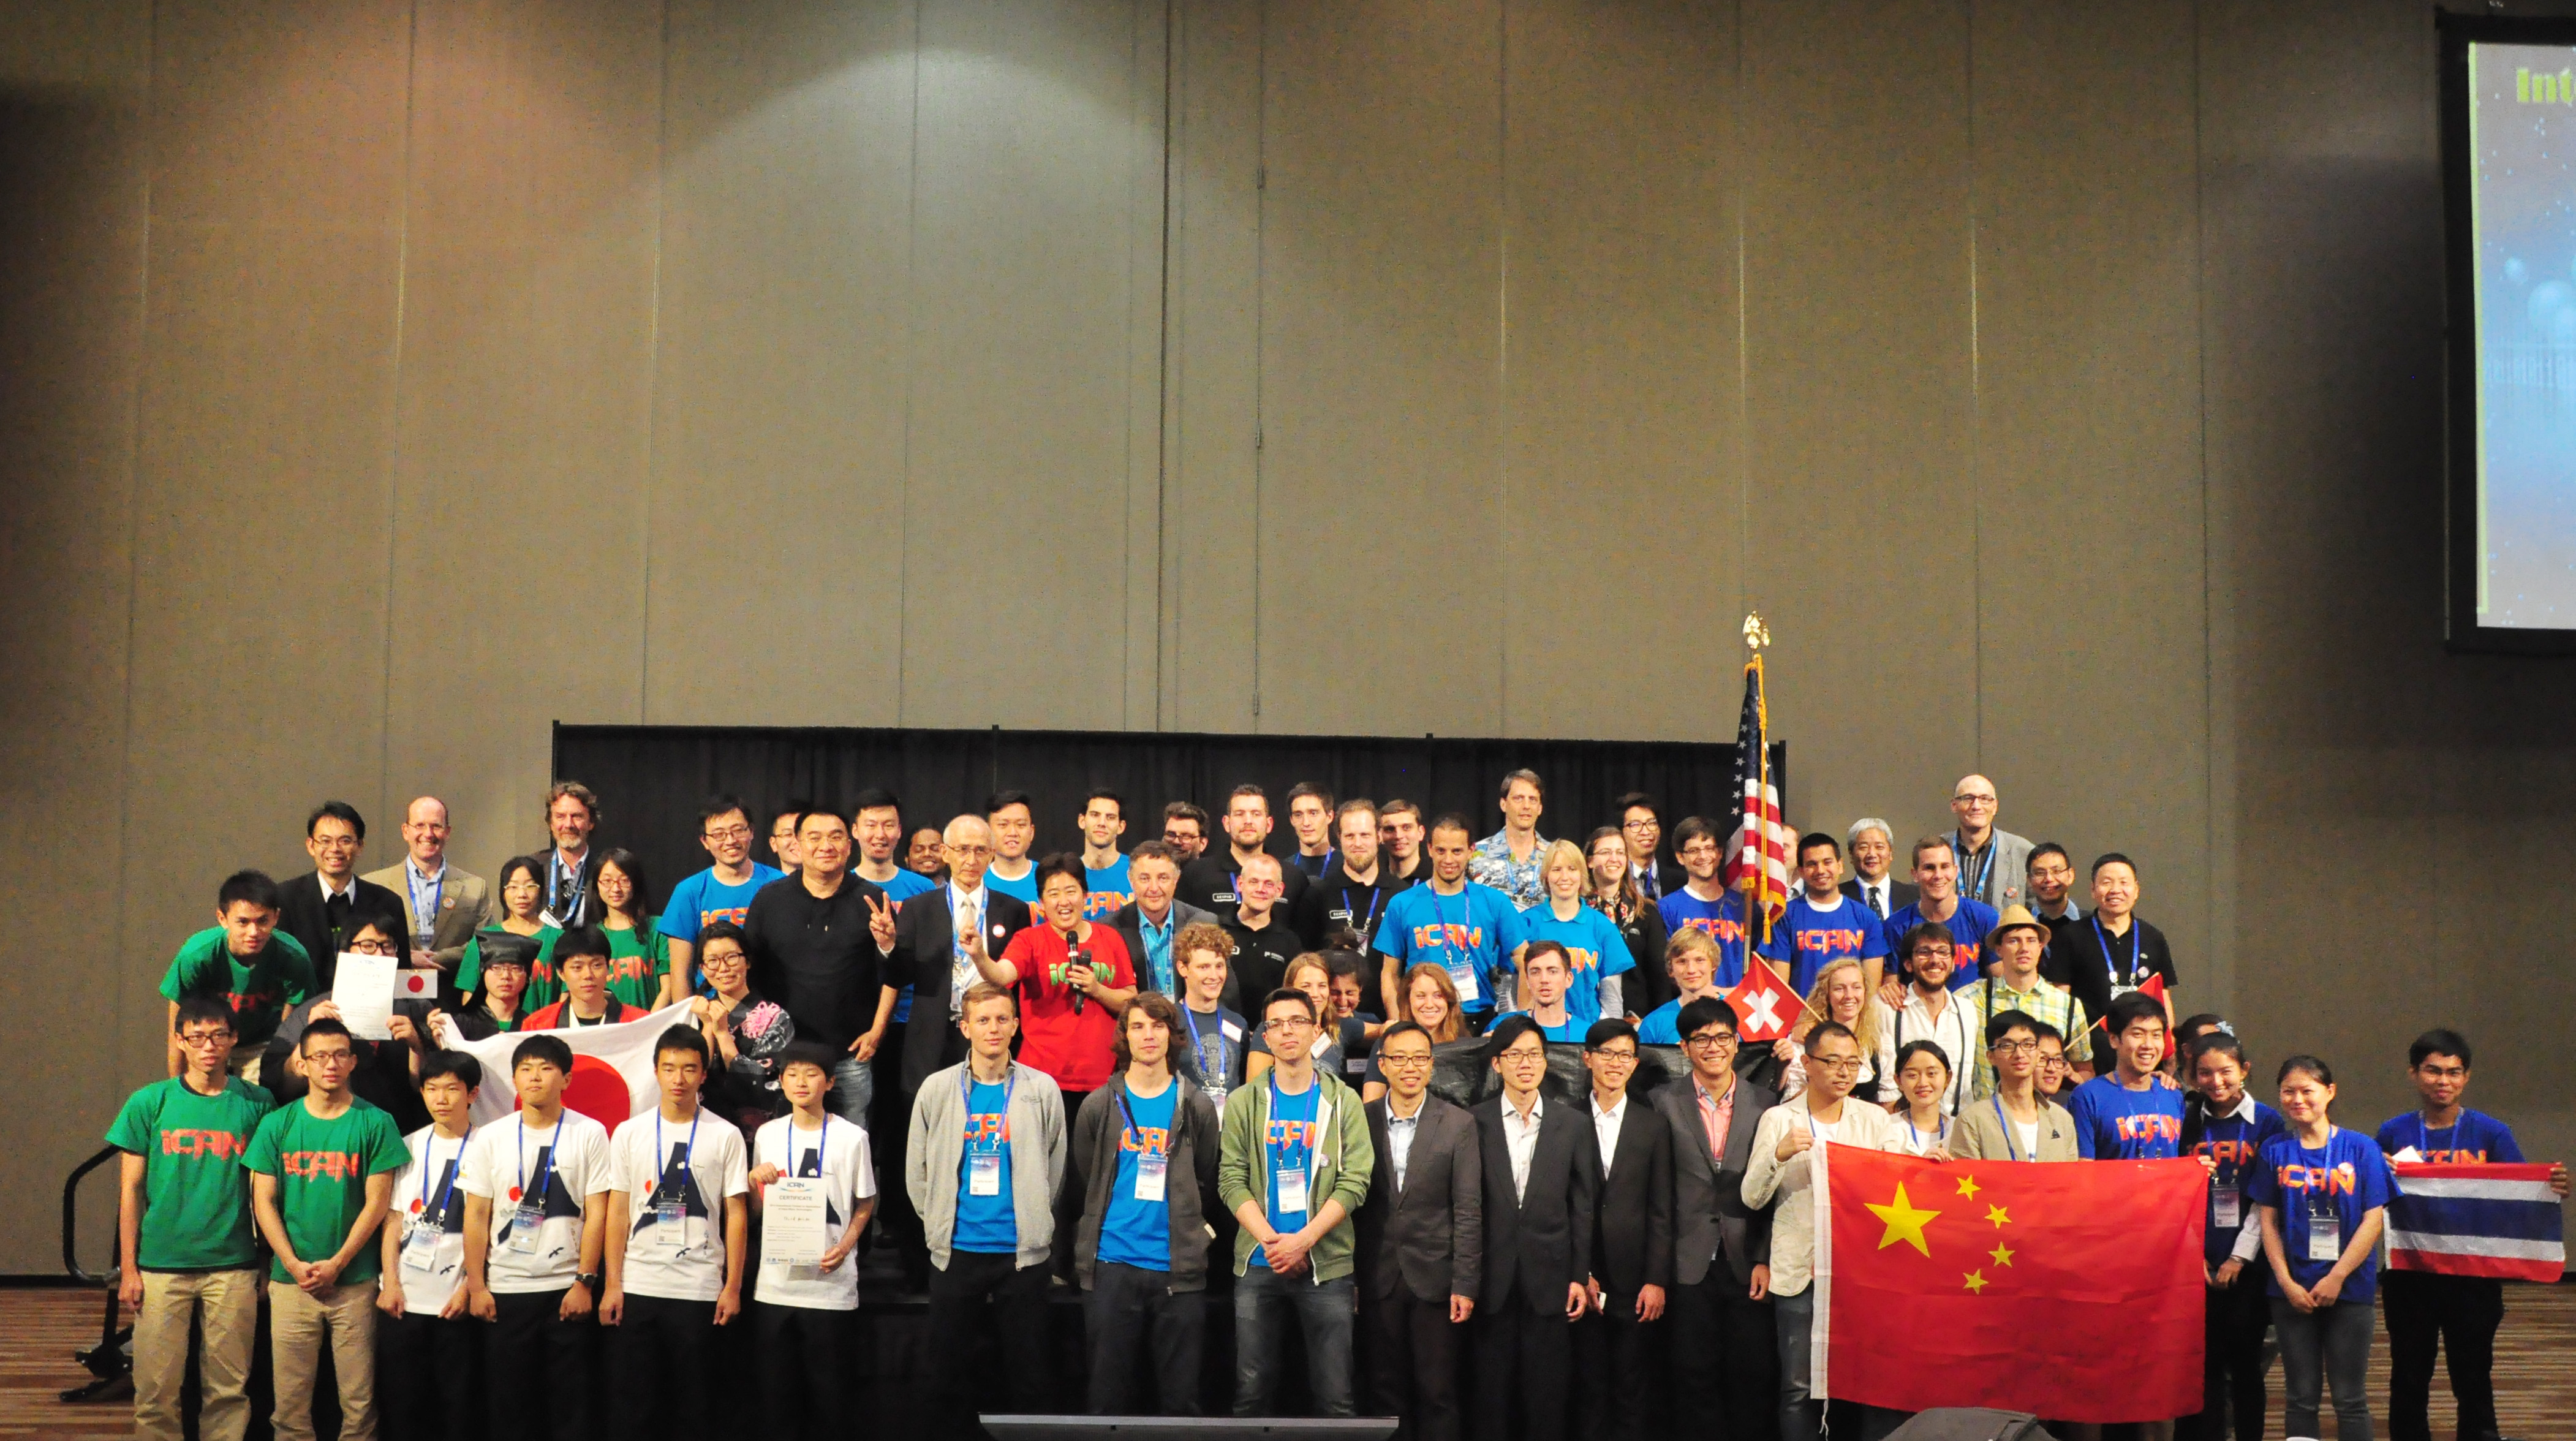 The iCAN contingent, representing 20 countries at the World Finals.